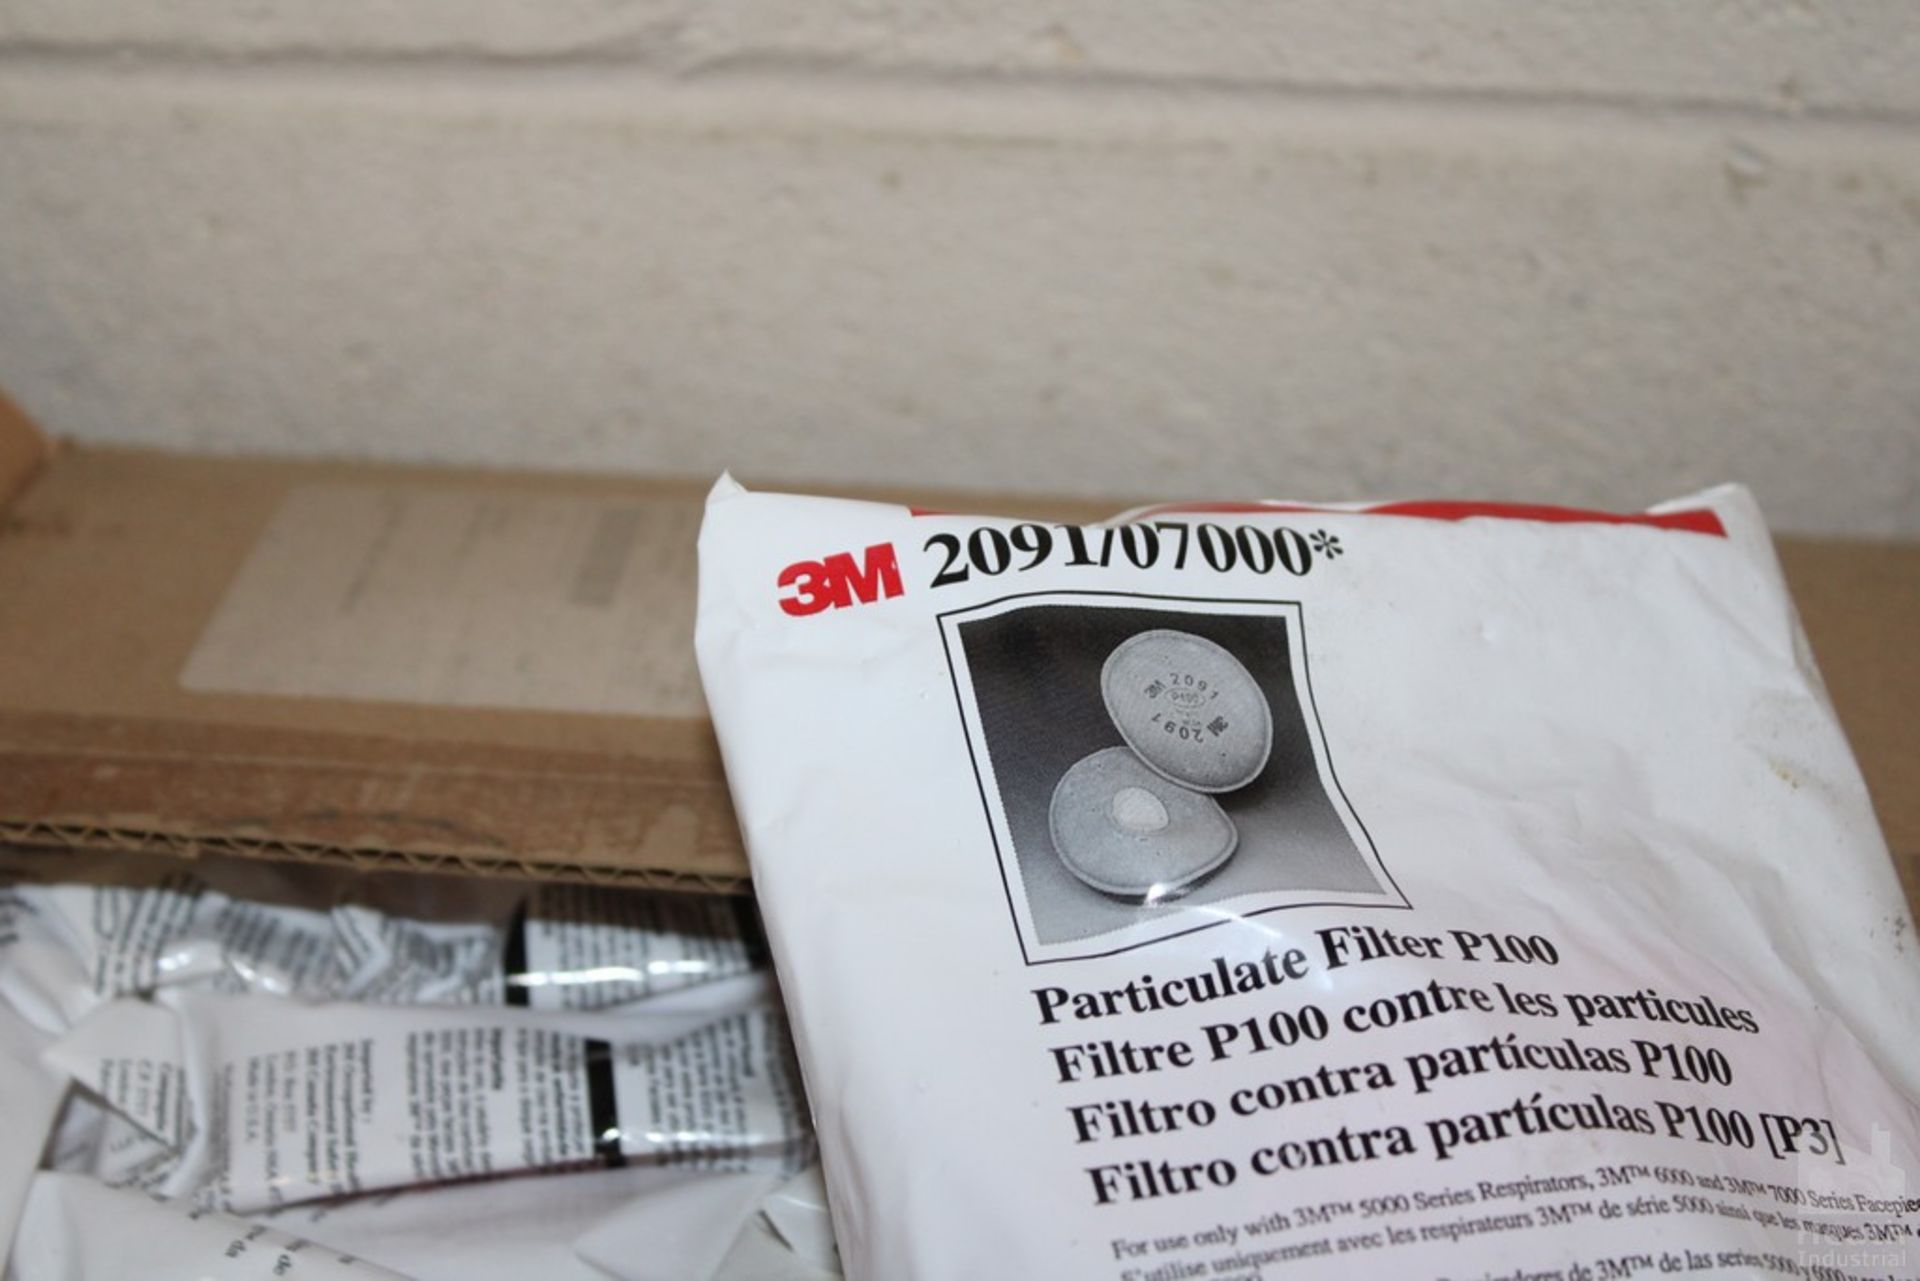 CASE OF 3M 2091/07000 PARTICULATE FILTERS - Image 2 of 2